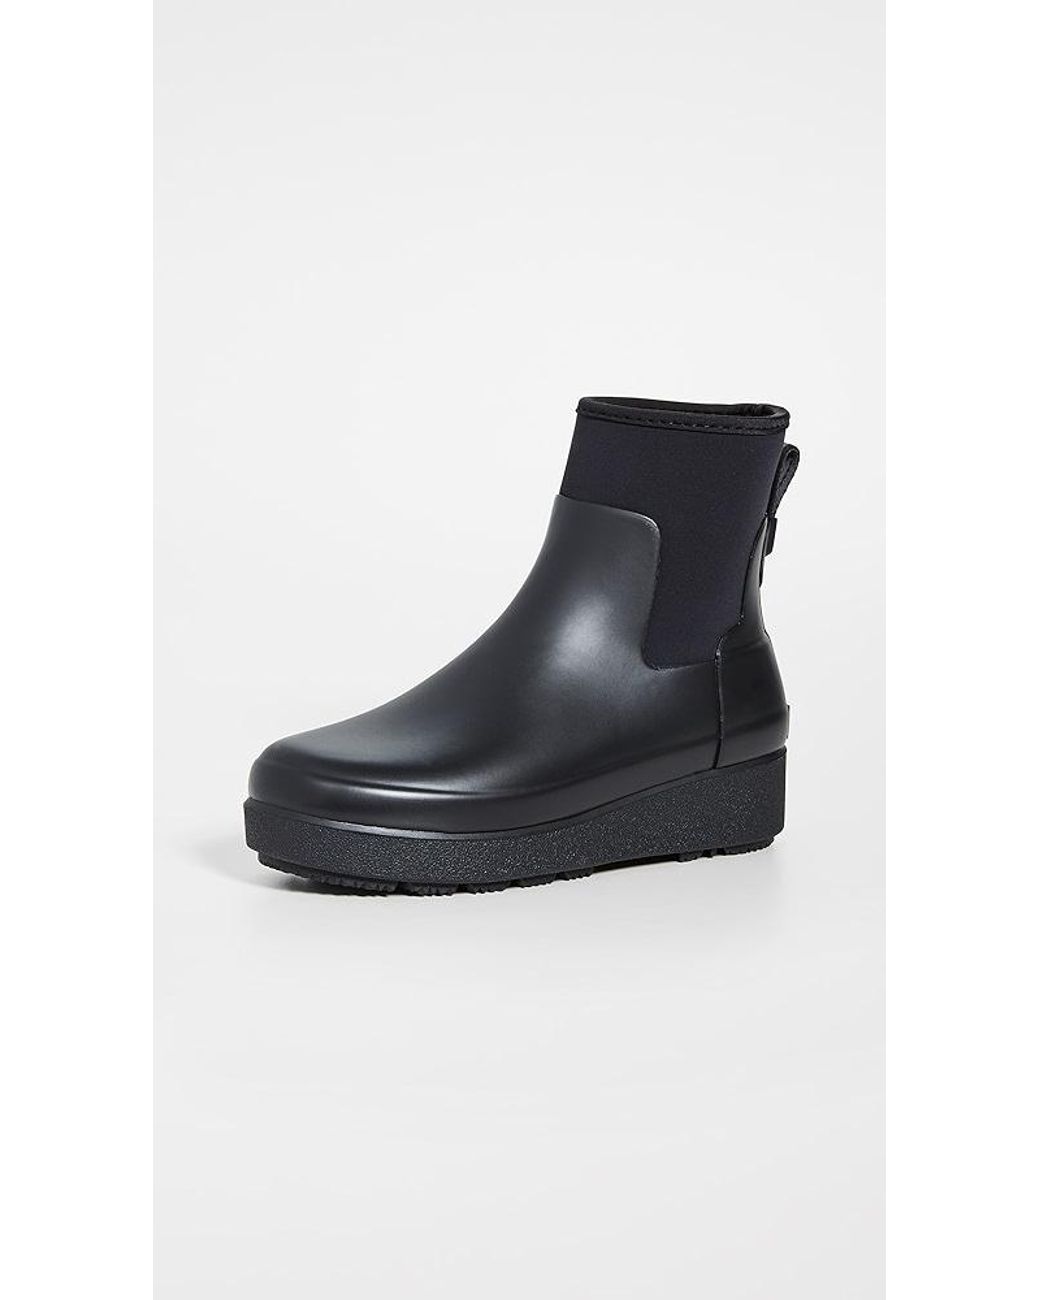 HUNTER Refined Creeper Neo Chelsea Boots in Black | Lyst